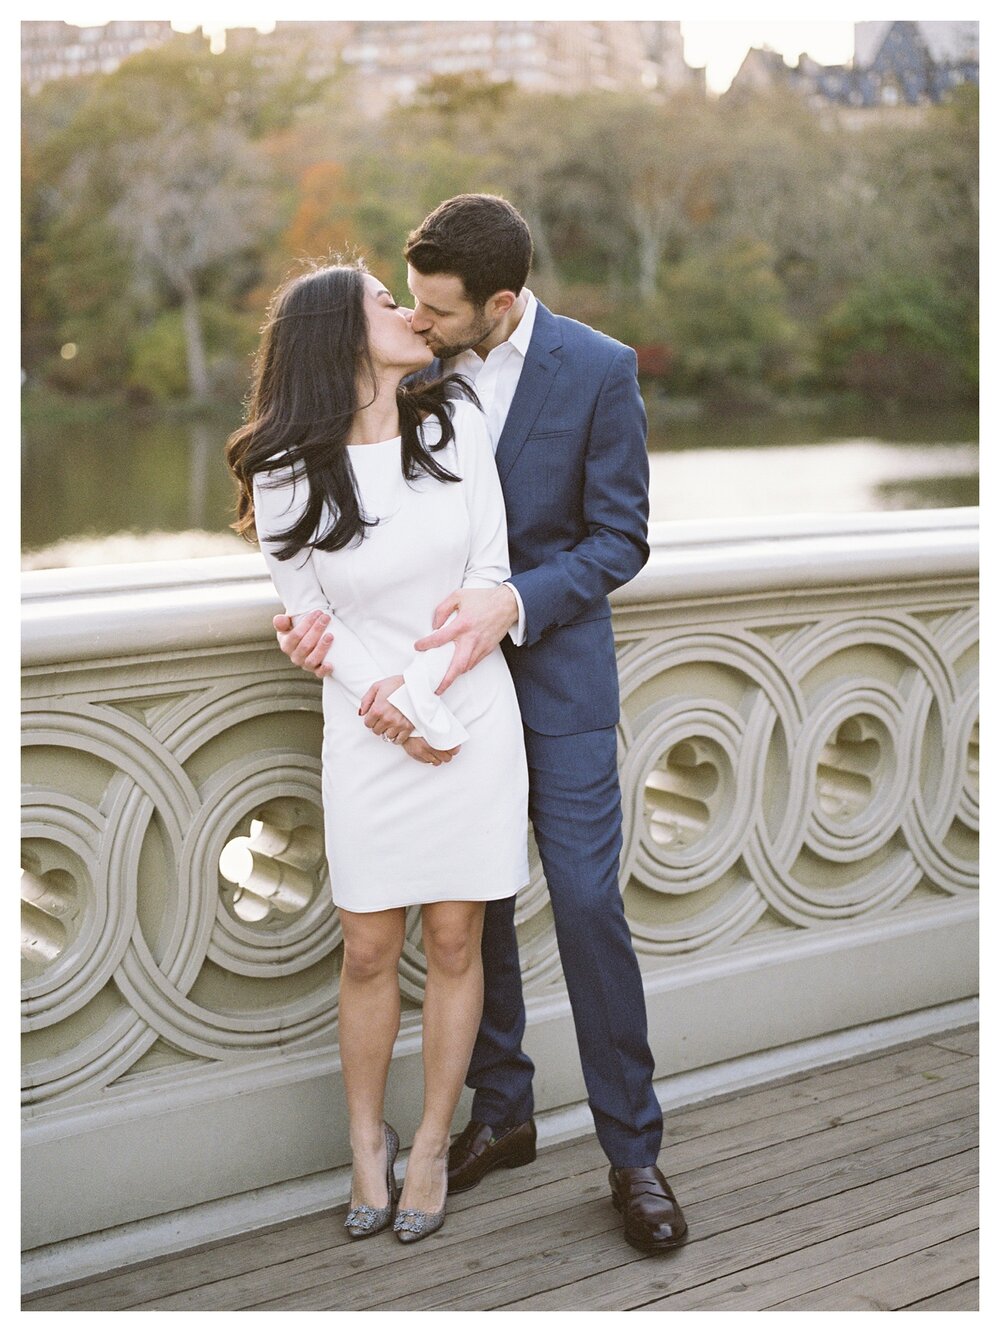  Fall engagement session in central park bow bridge couple kissing 